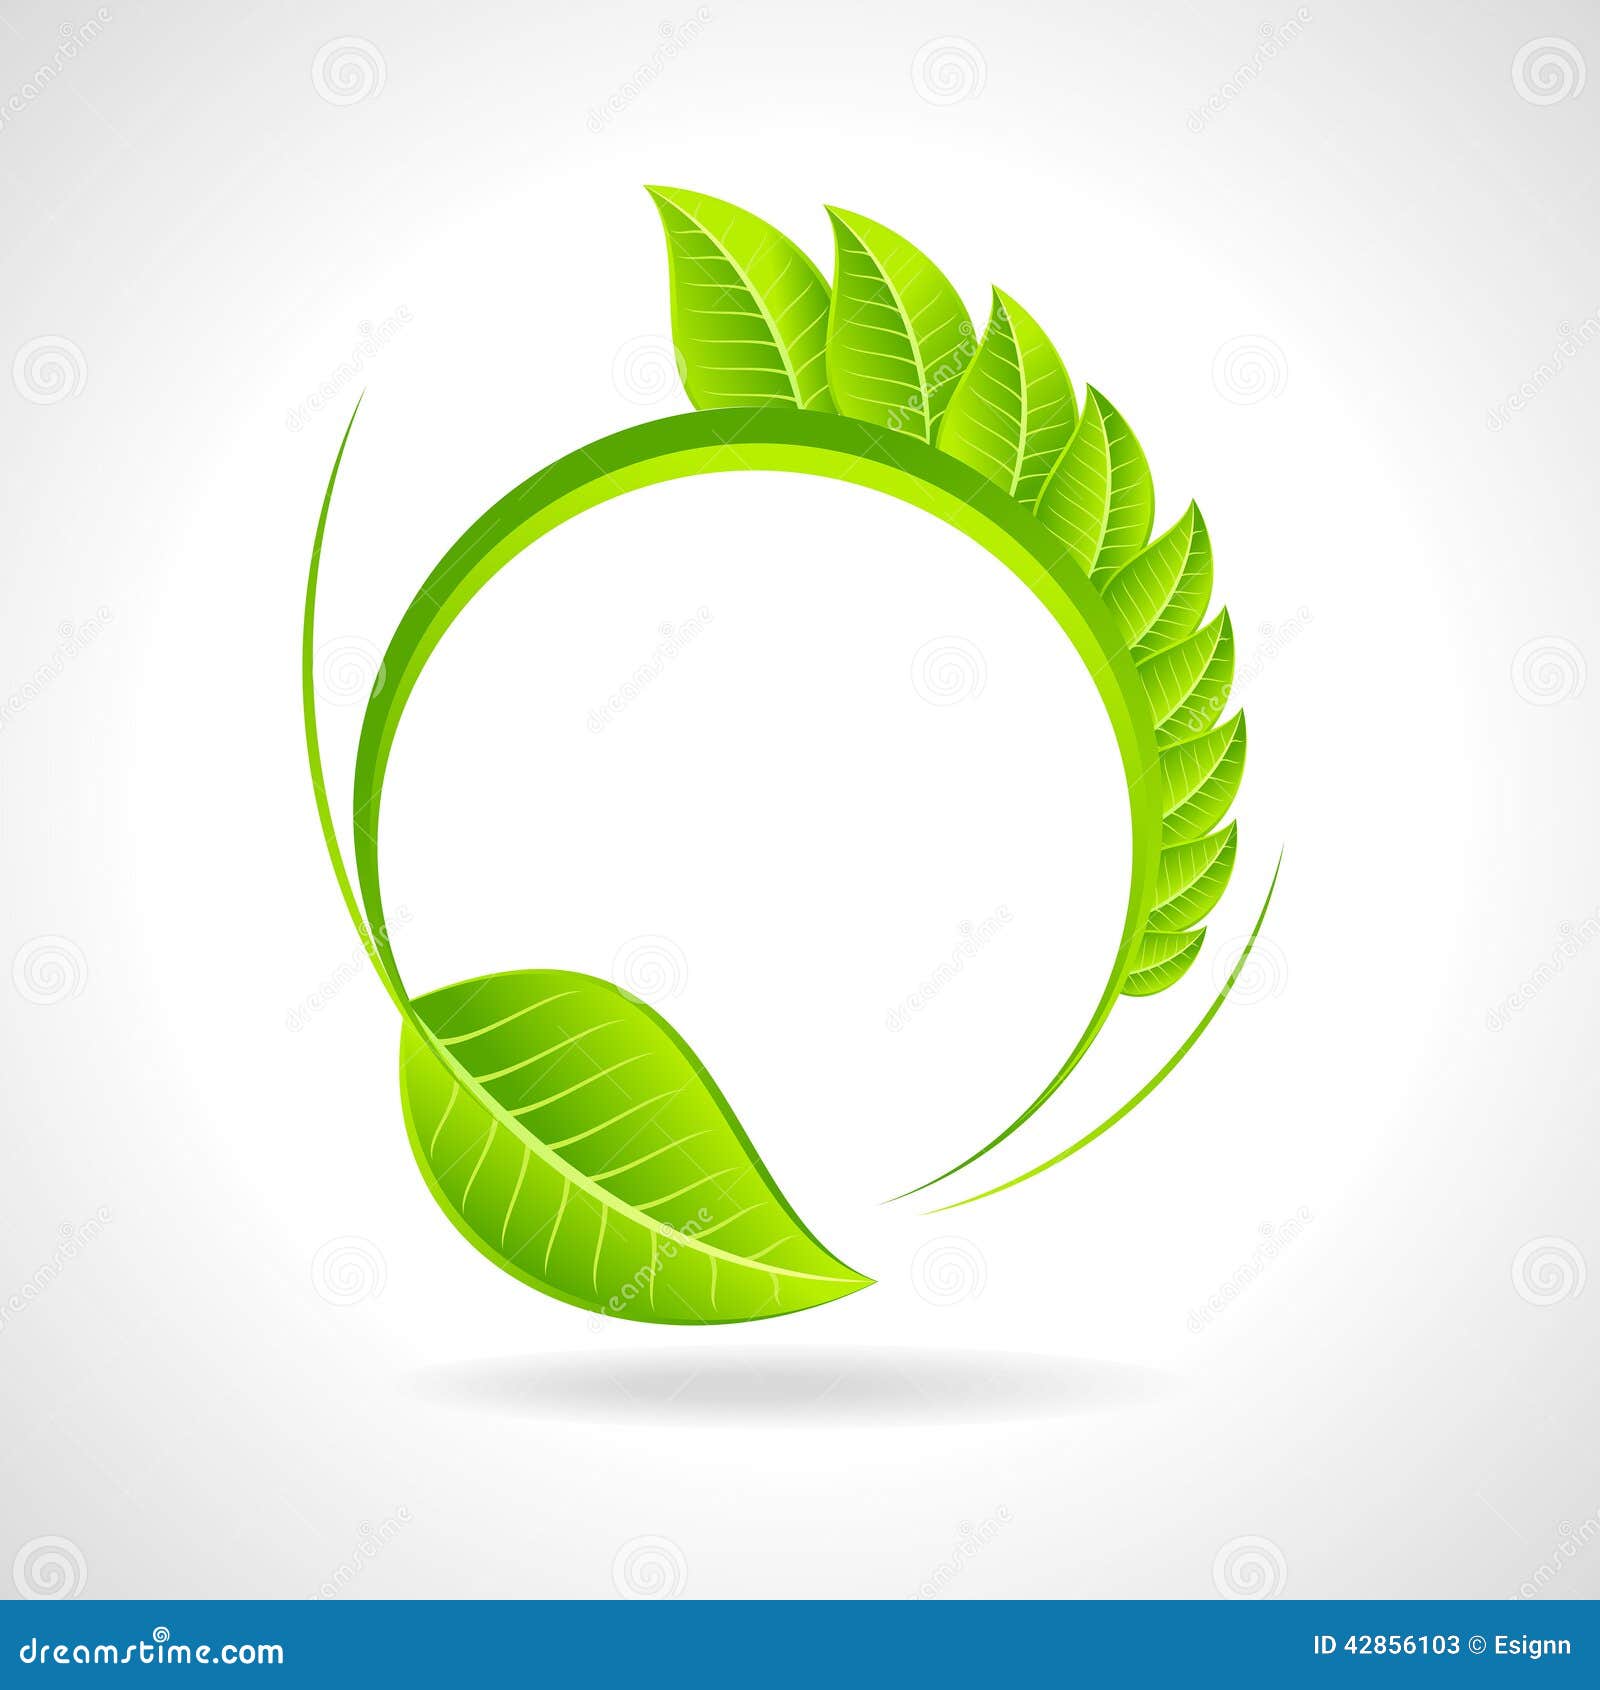 green eco friendly icon with leaf on circle